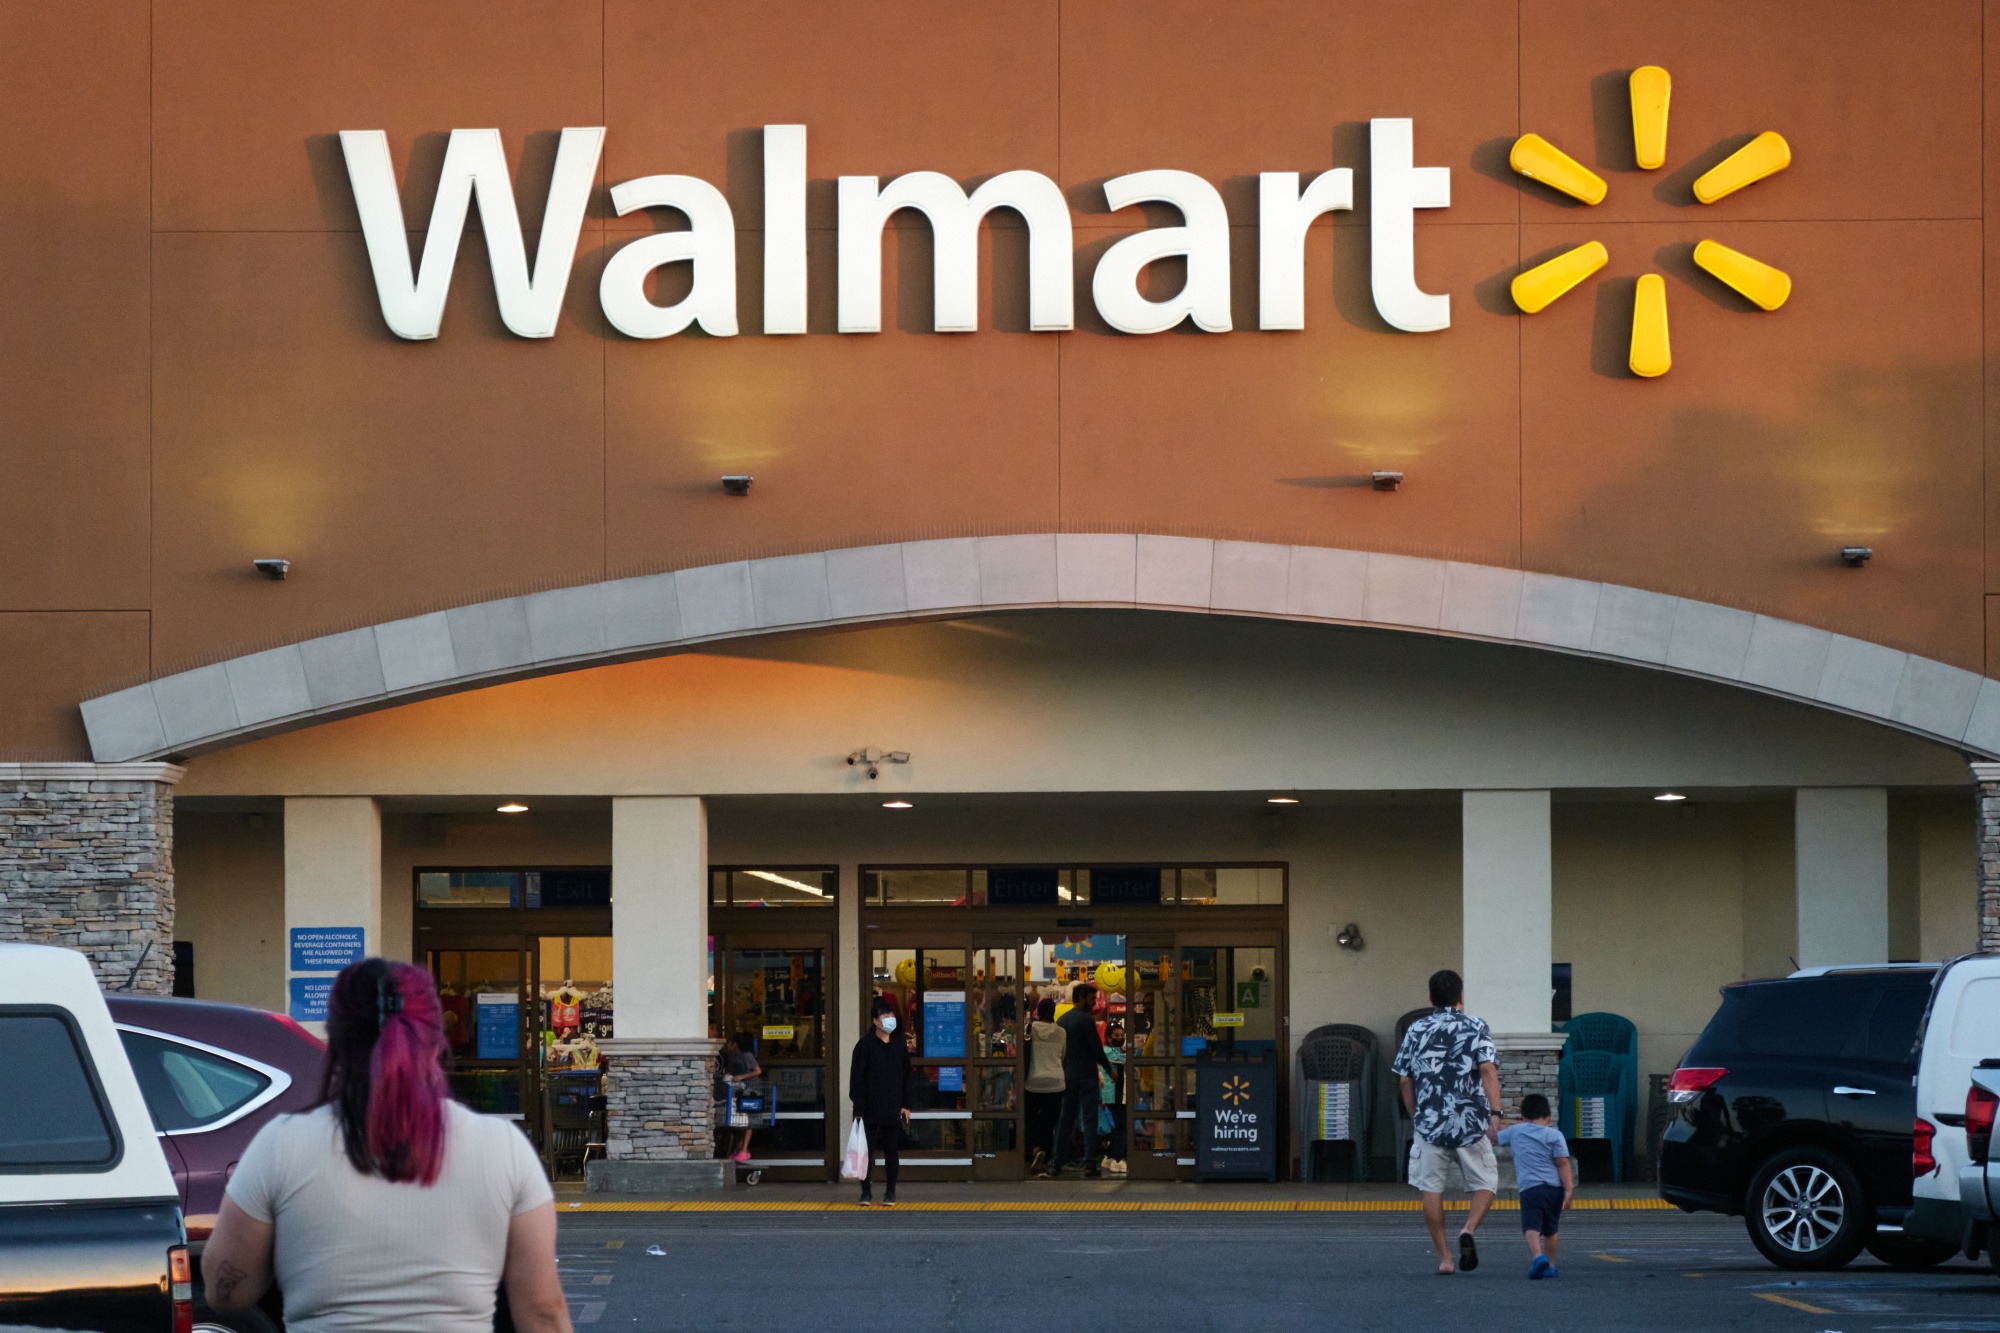 City council calls on Walmart to address safety concerns